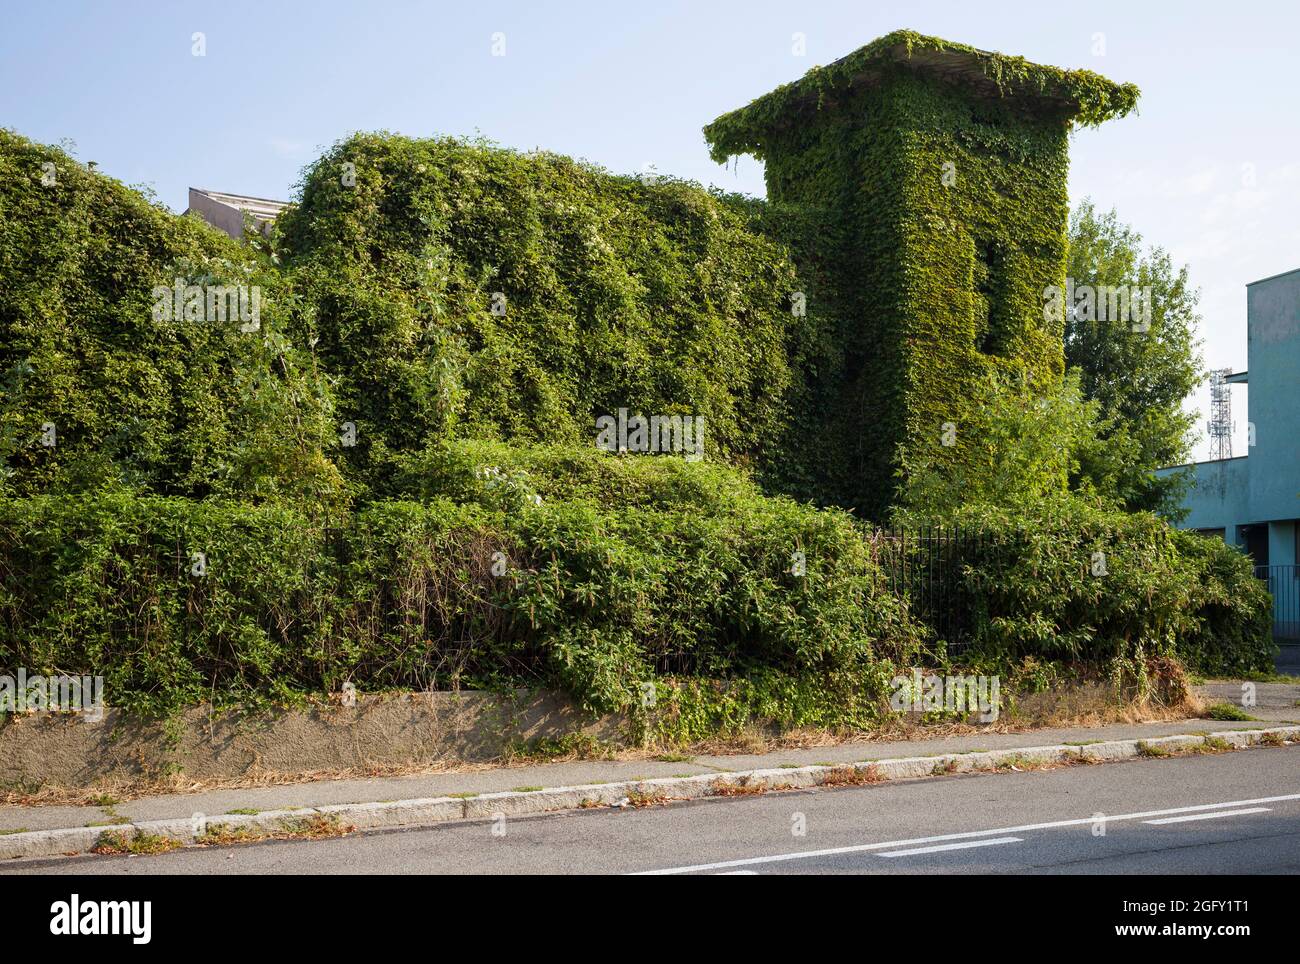 An abandoned, overgrown factory in Treviglio in Lombardy / Lombardia, covered in ivy / edera / Hedera Helix and other plants. Stock Photo